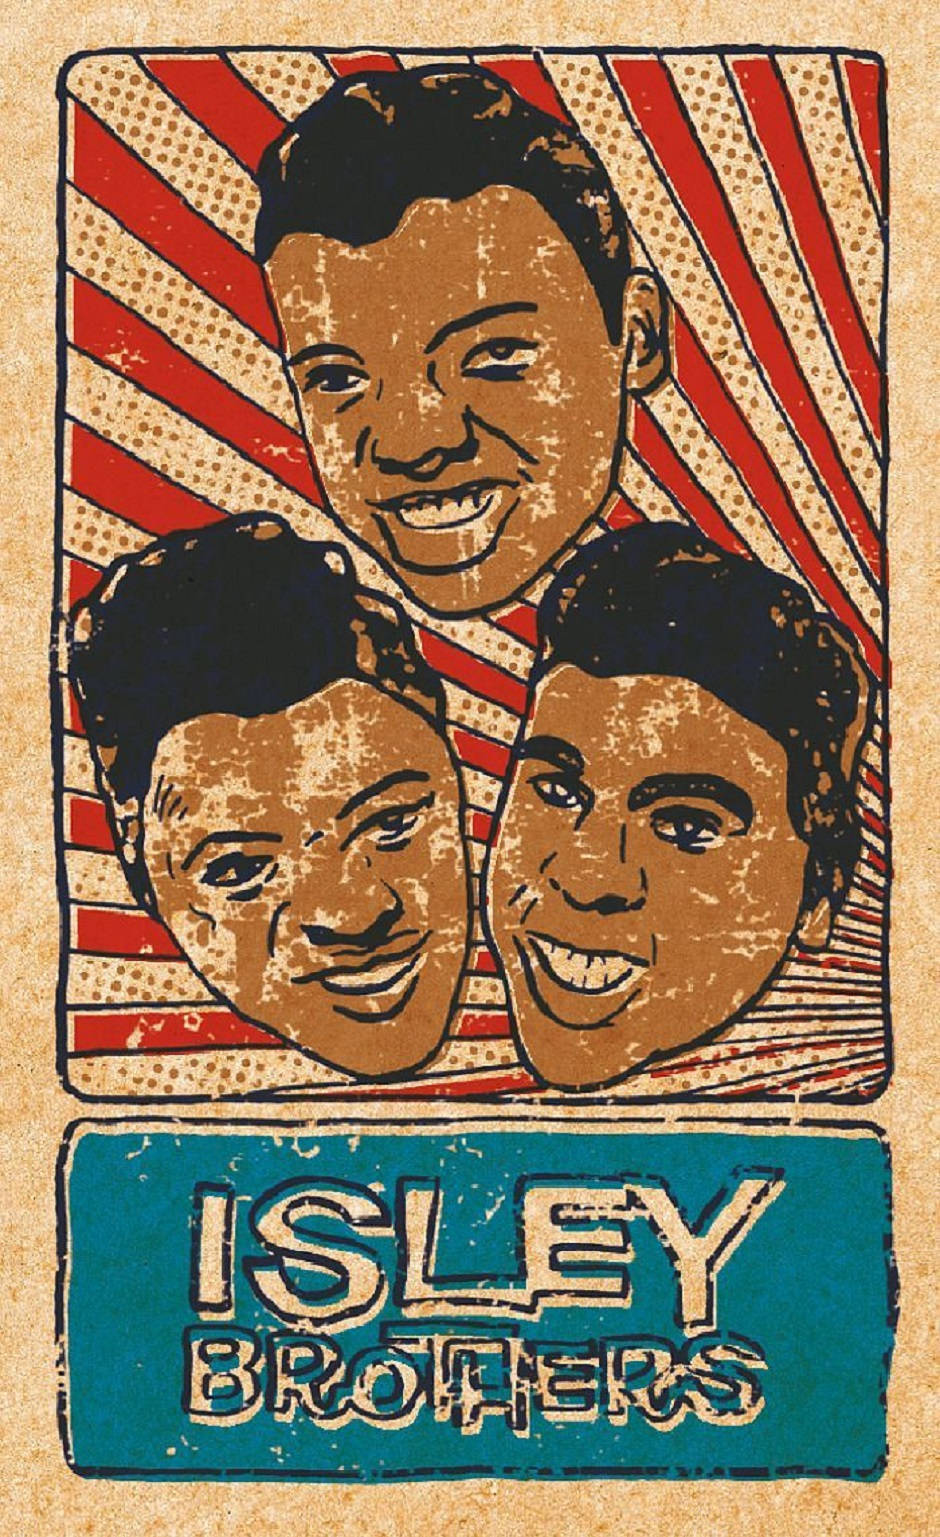 Dieisley Brothers Poster-illustration Wallpaper